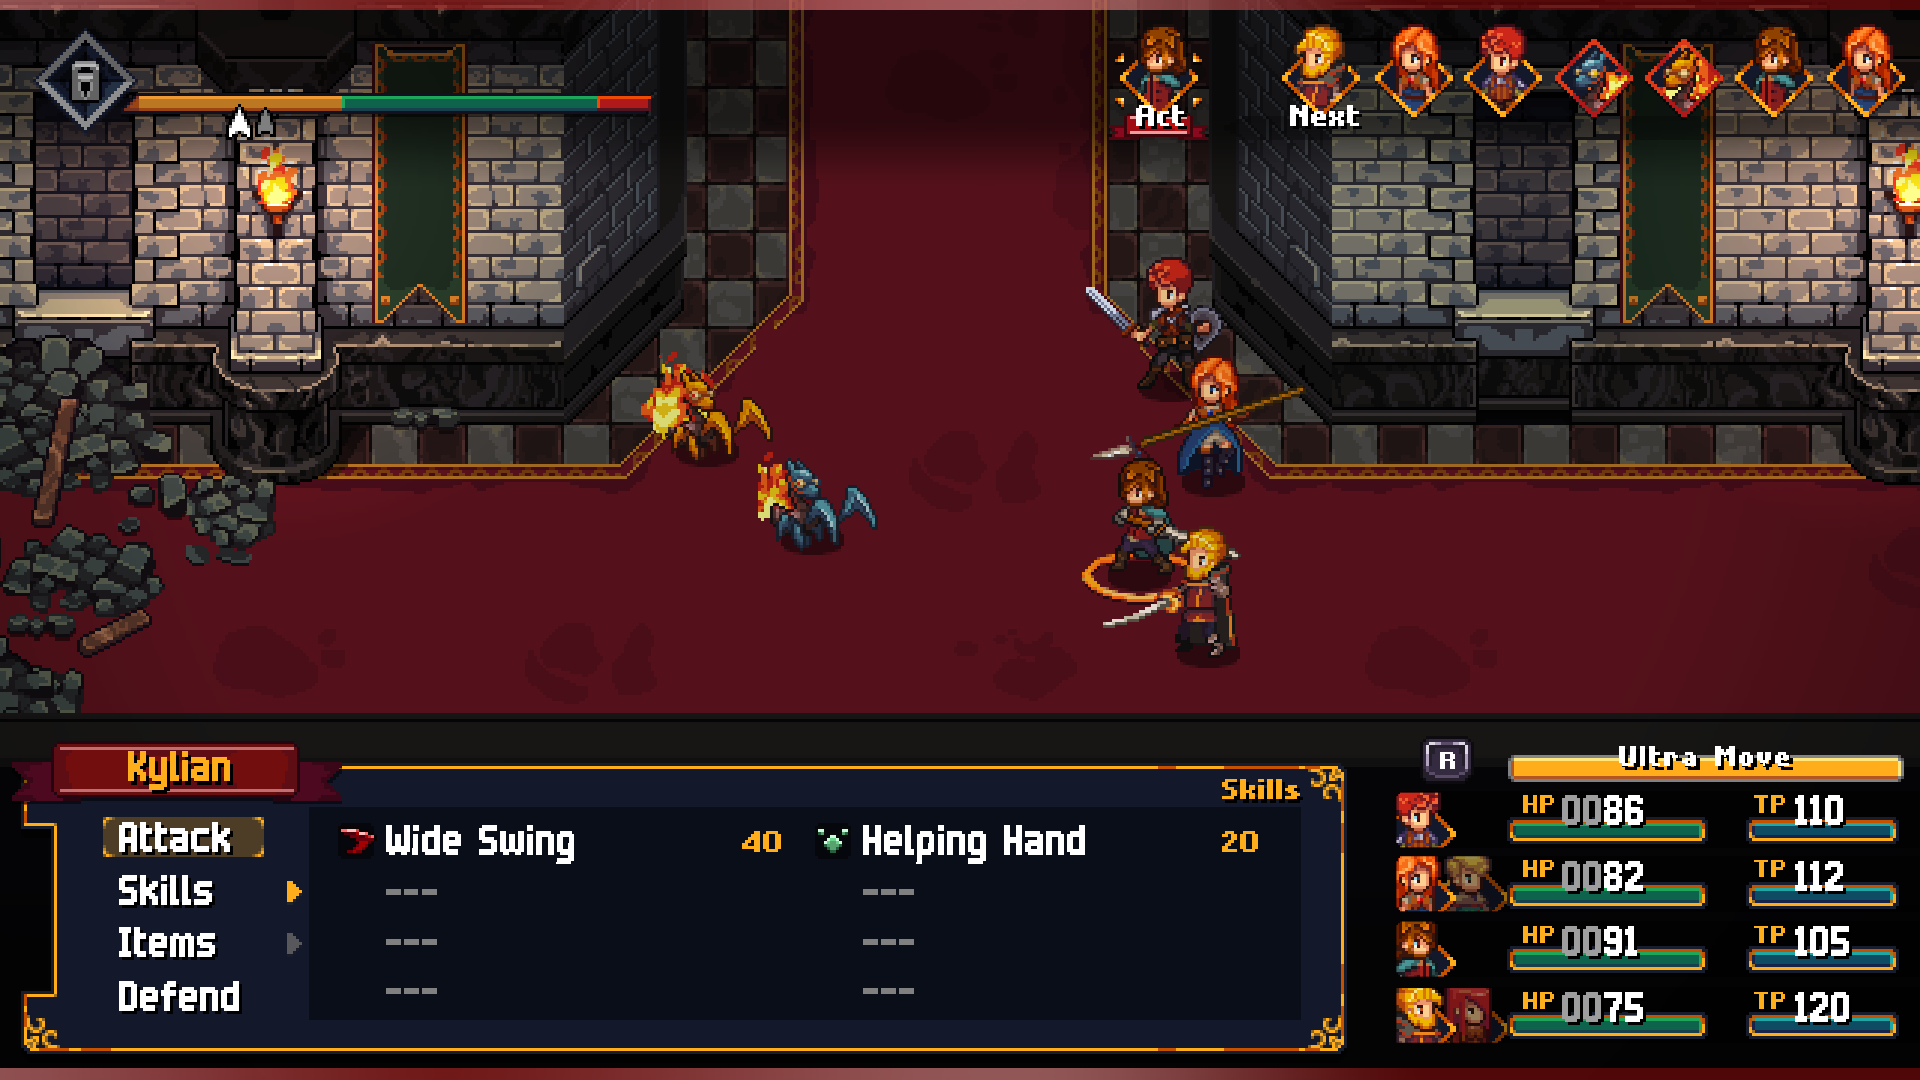 A battle screen showing four warriors fighting mechanical spiders in a royal castle in Chained Echoes